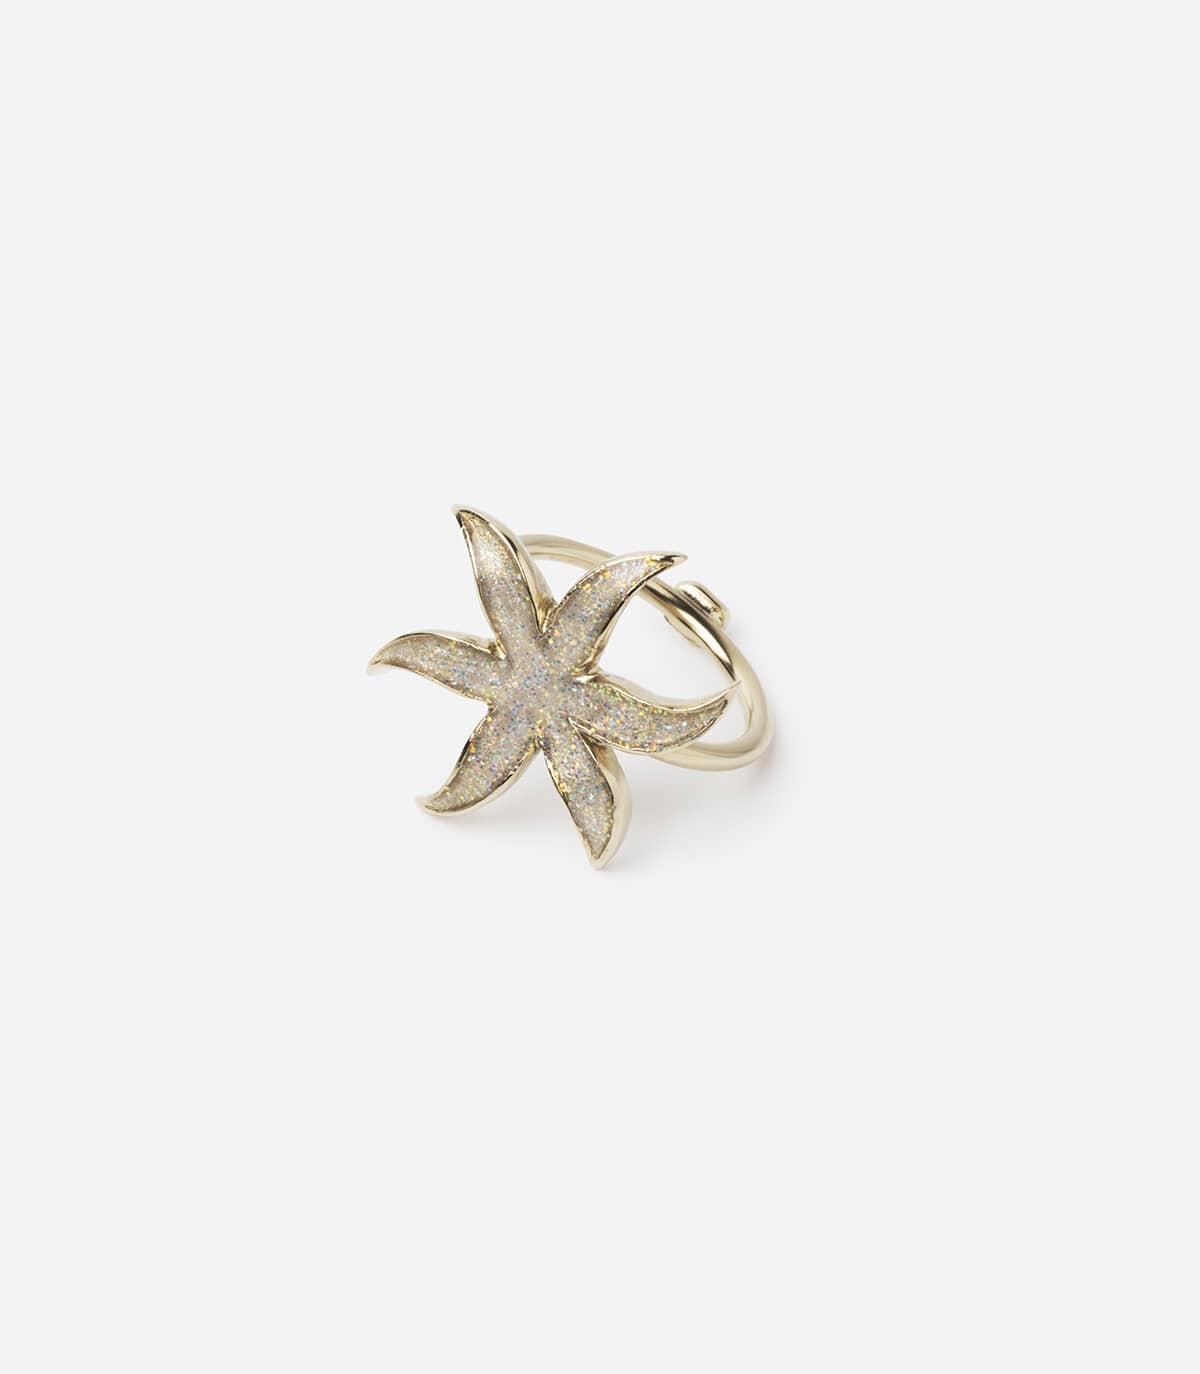 FENRIR SMALL EDELWEISS RING - Bagues - Delphine-Charlotte Parmentier